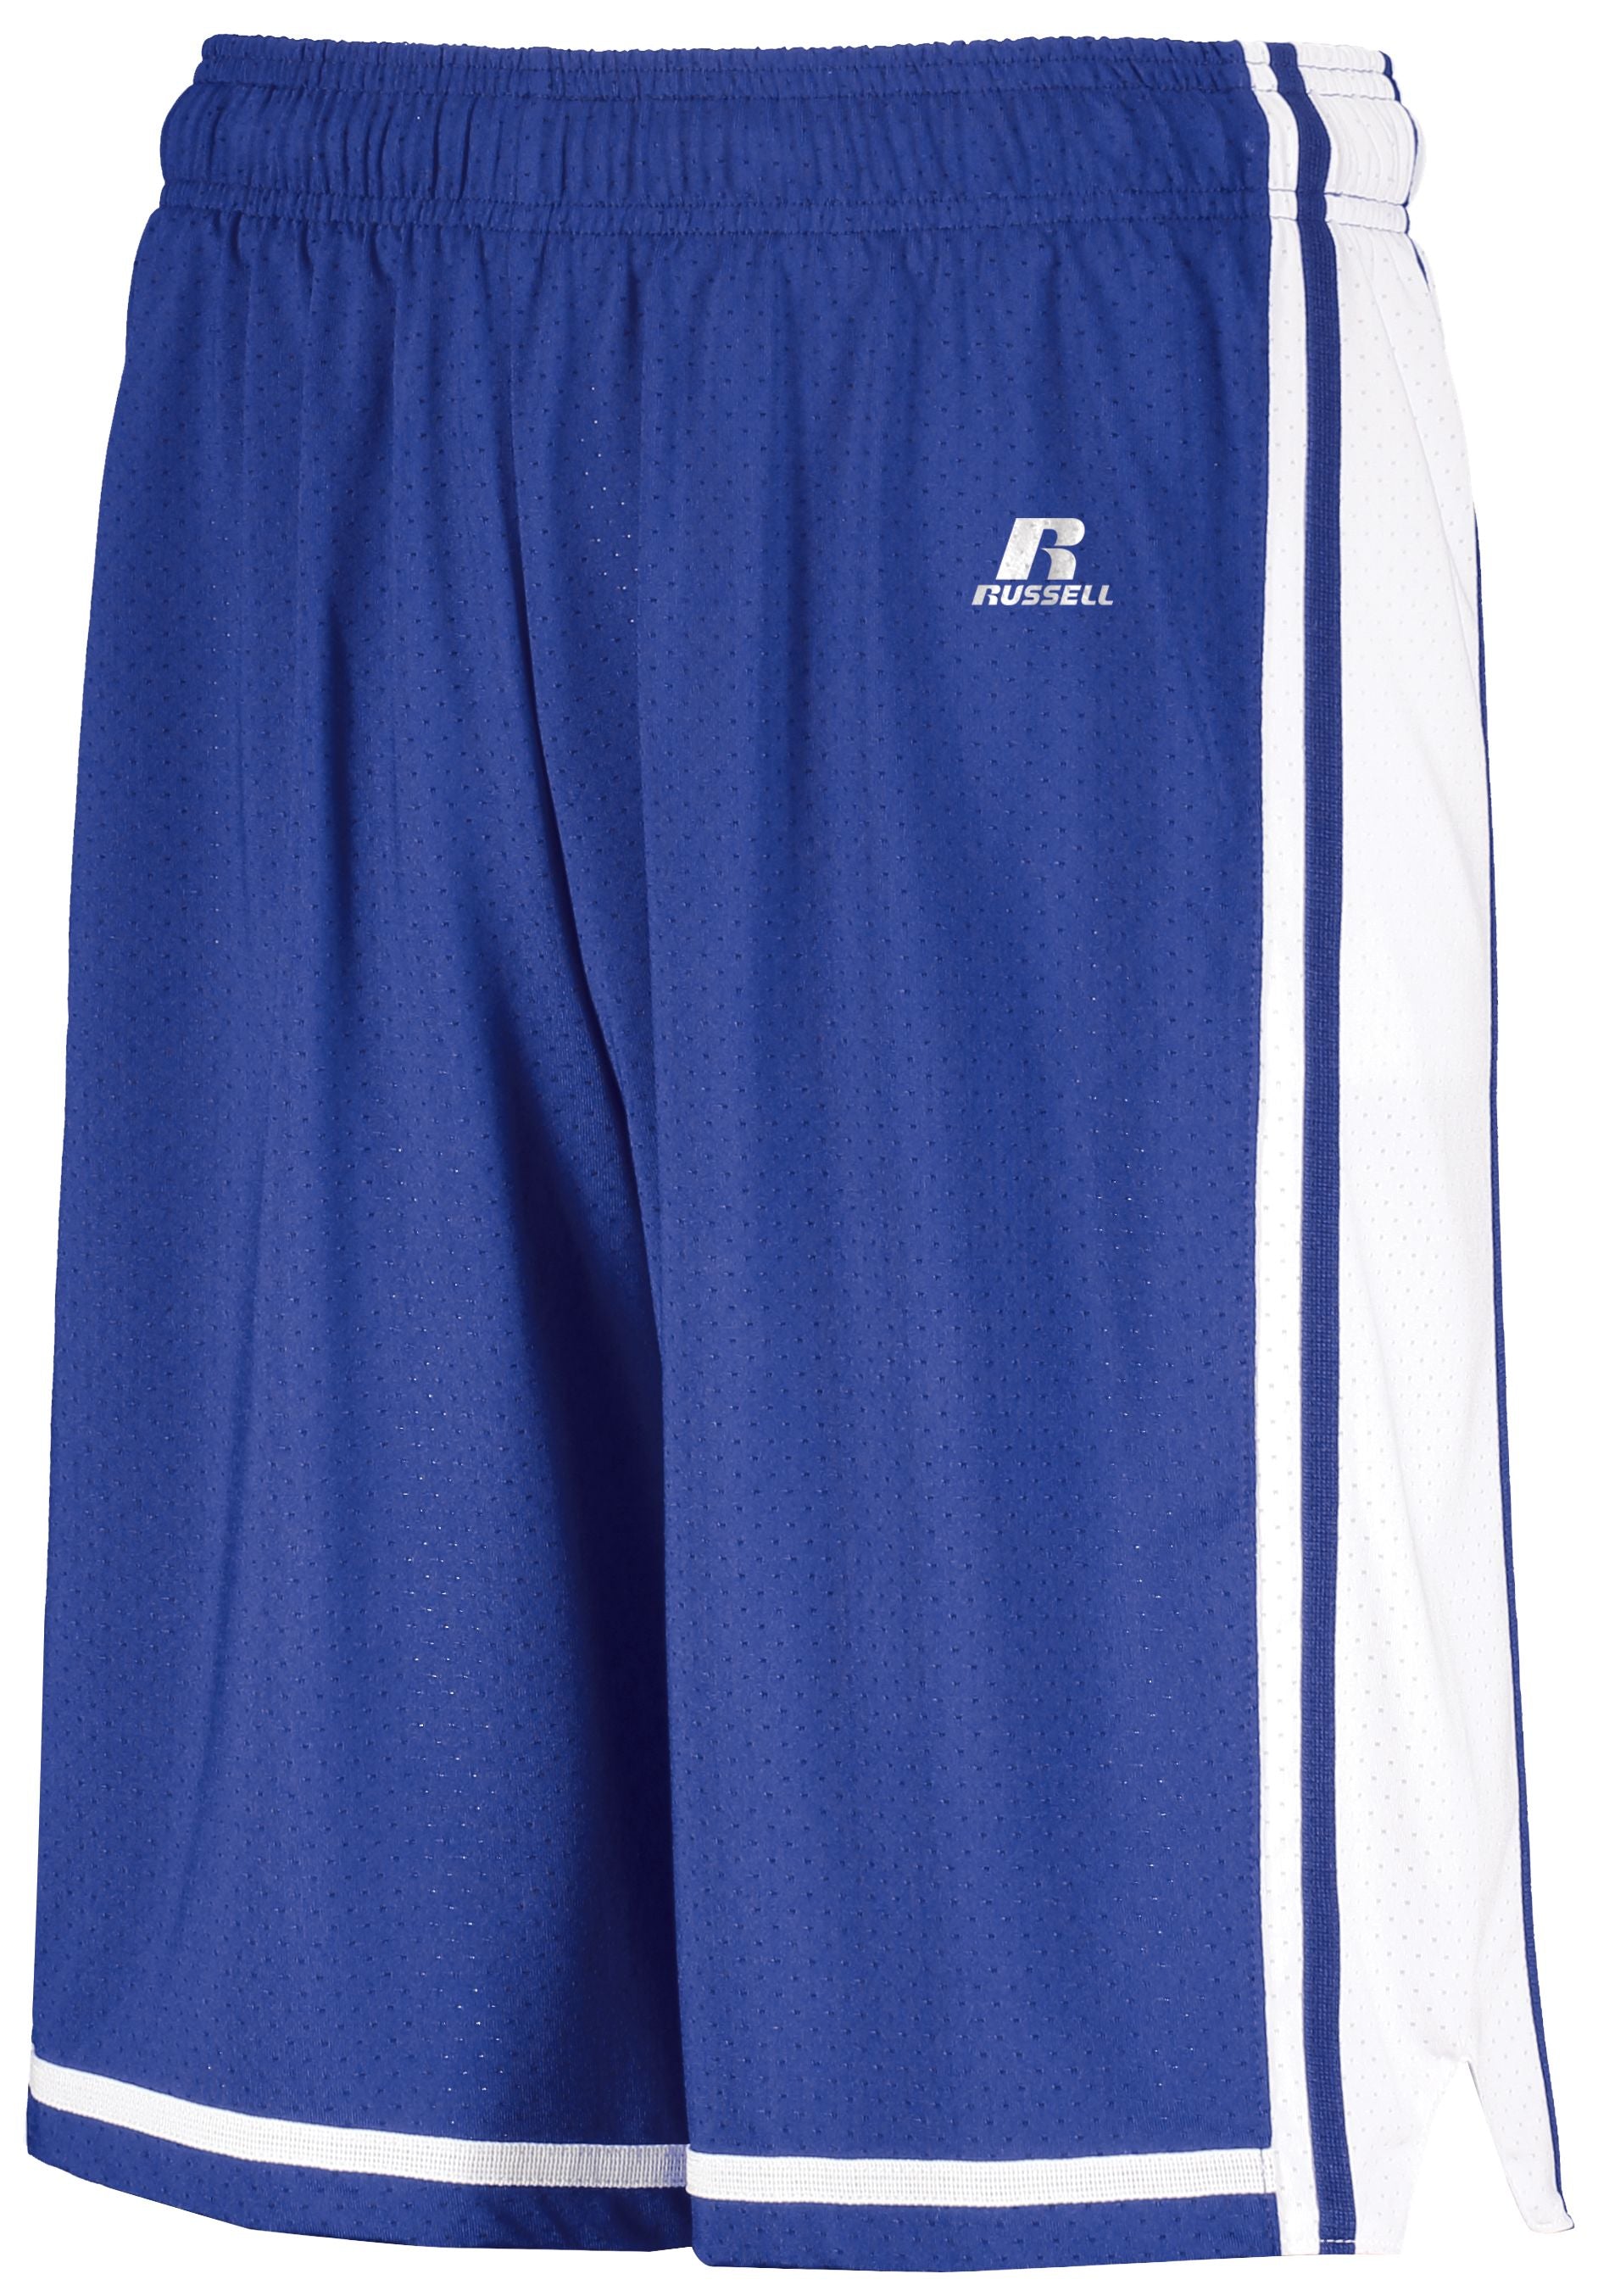 Russell Athletic Legacy Basketball Shorts in Royal/White  -Part of the Adult, Adult-Shorts, Basketball, Russell-Athletic-Products, All-Sports, All-Sports-1 product lines at KanaleyCreations.com